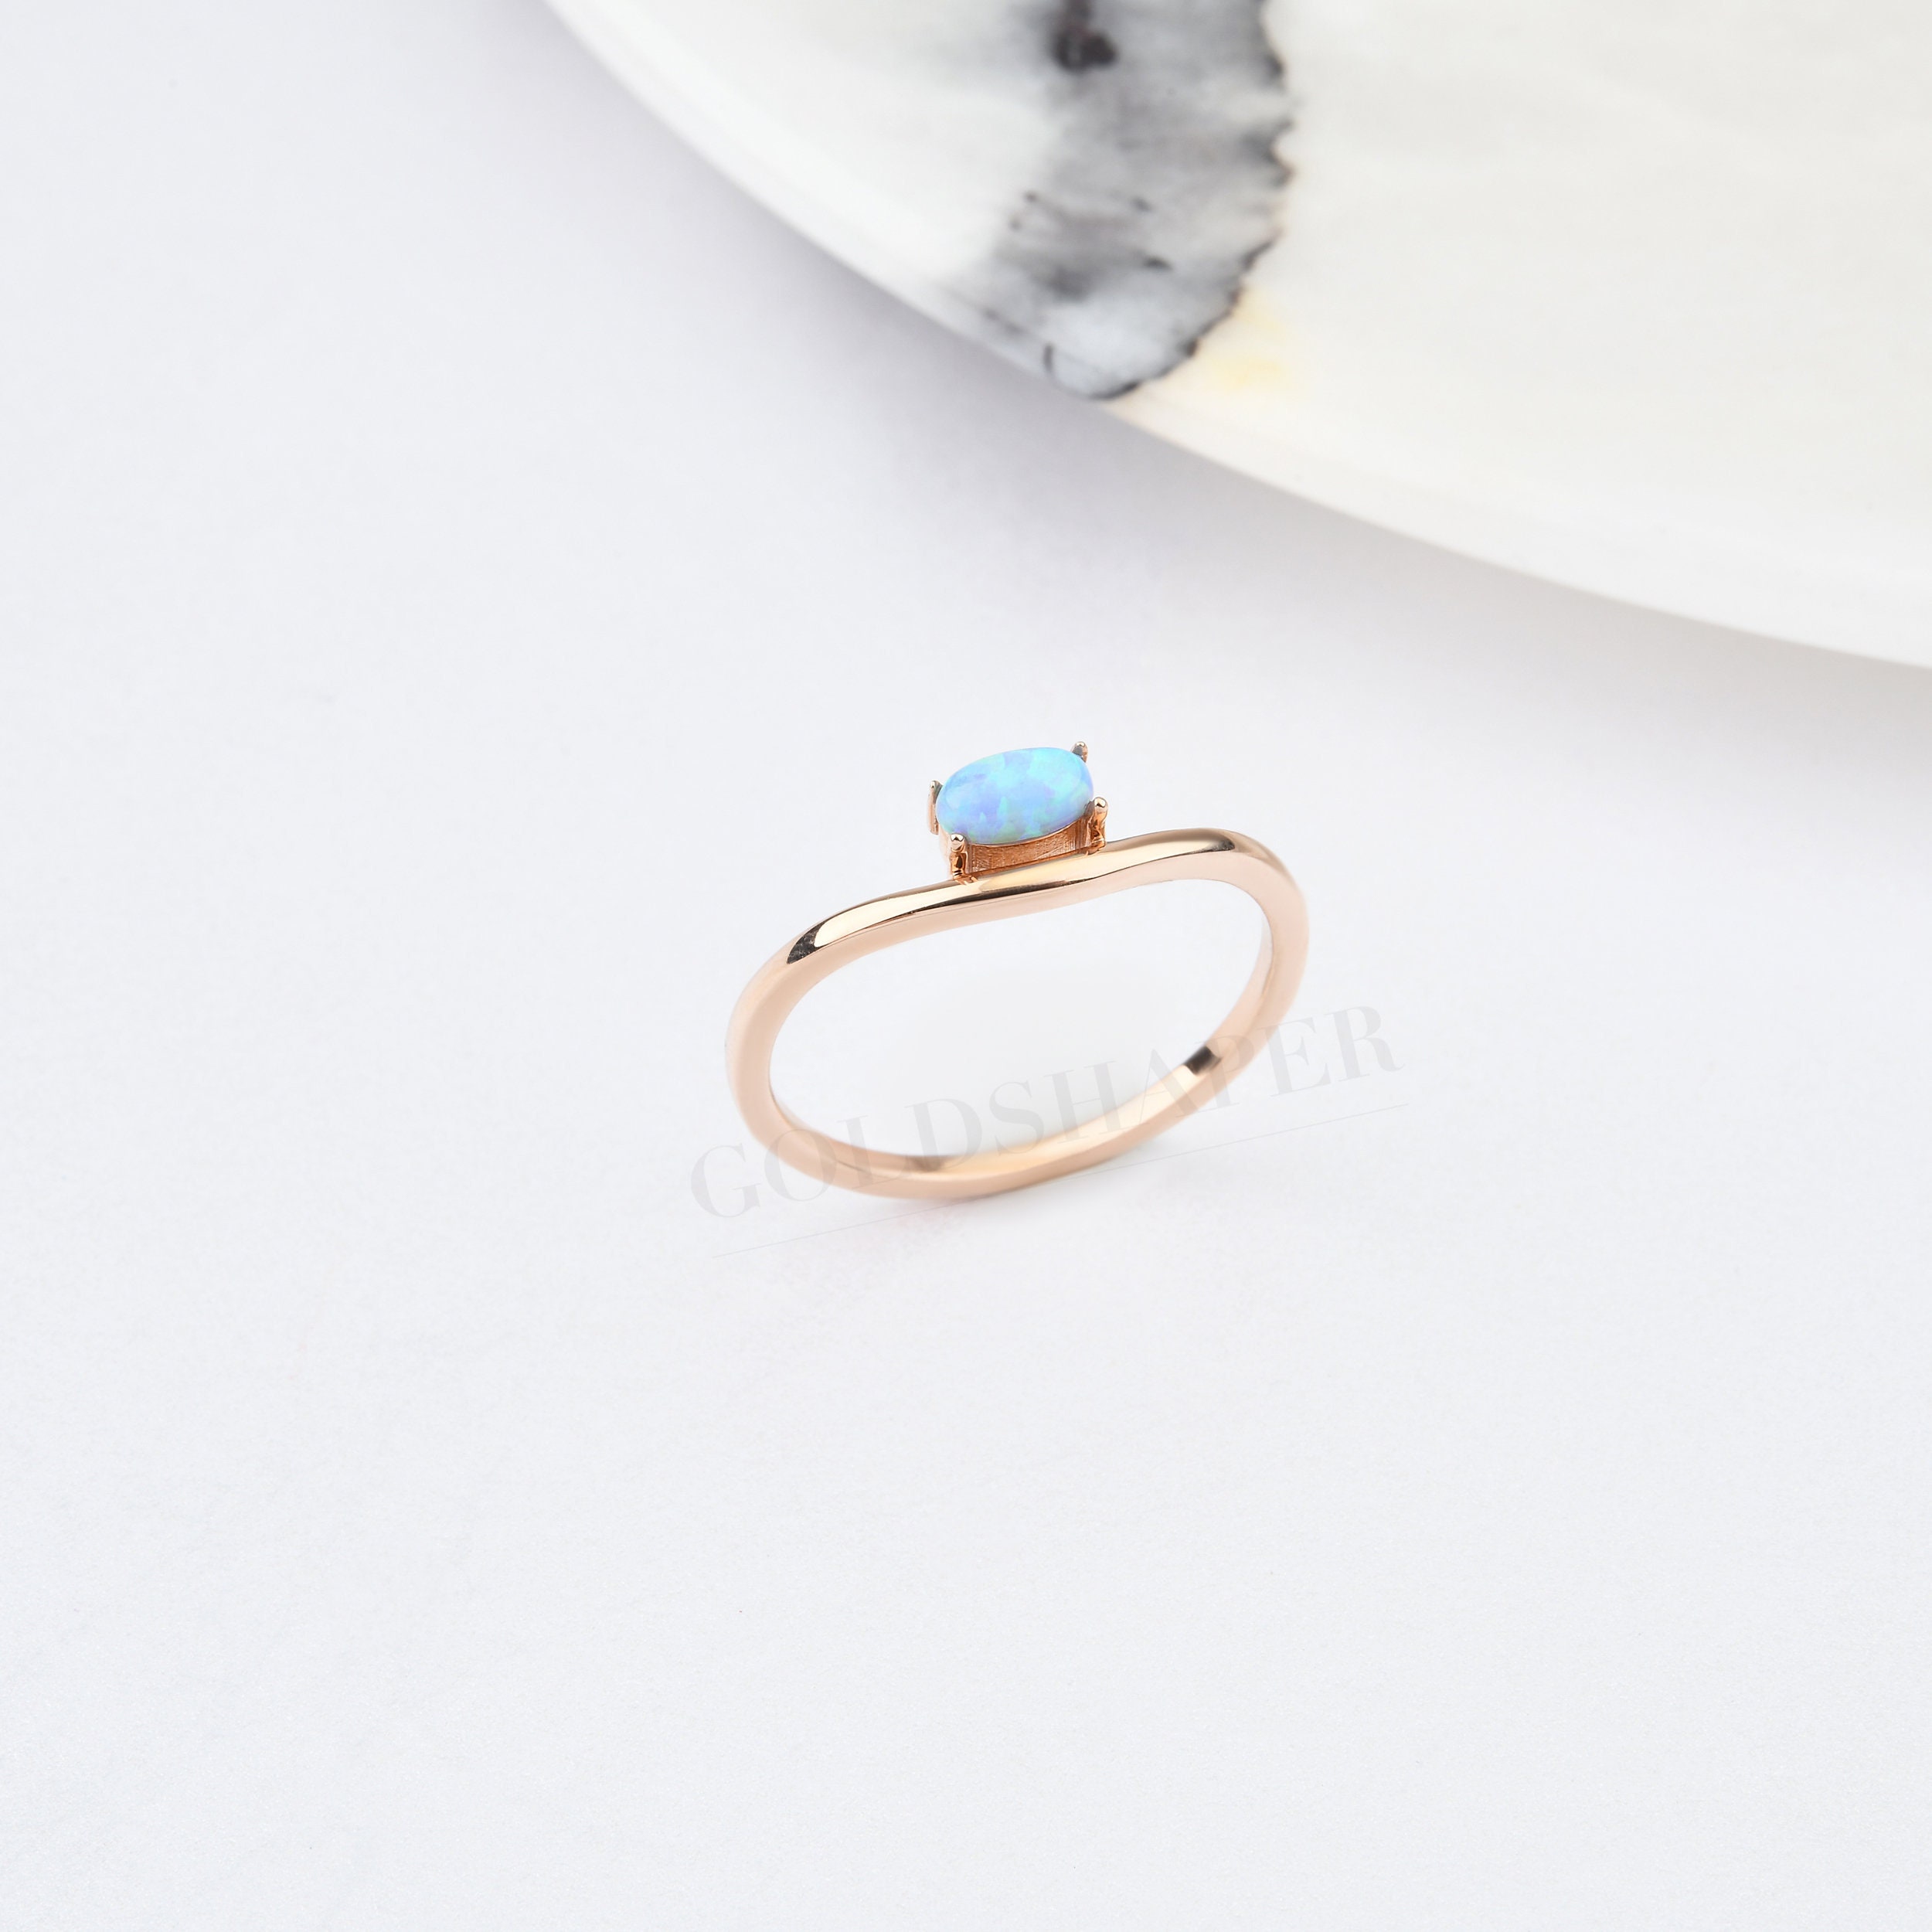 Blue Opal Ring, 14K Solid Gold, Opal, October Birthstone, Birthday Gift, Gift For Her, Christmas Gift